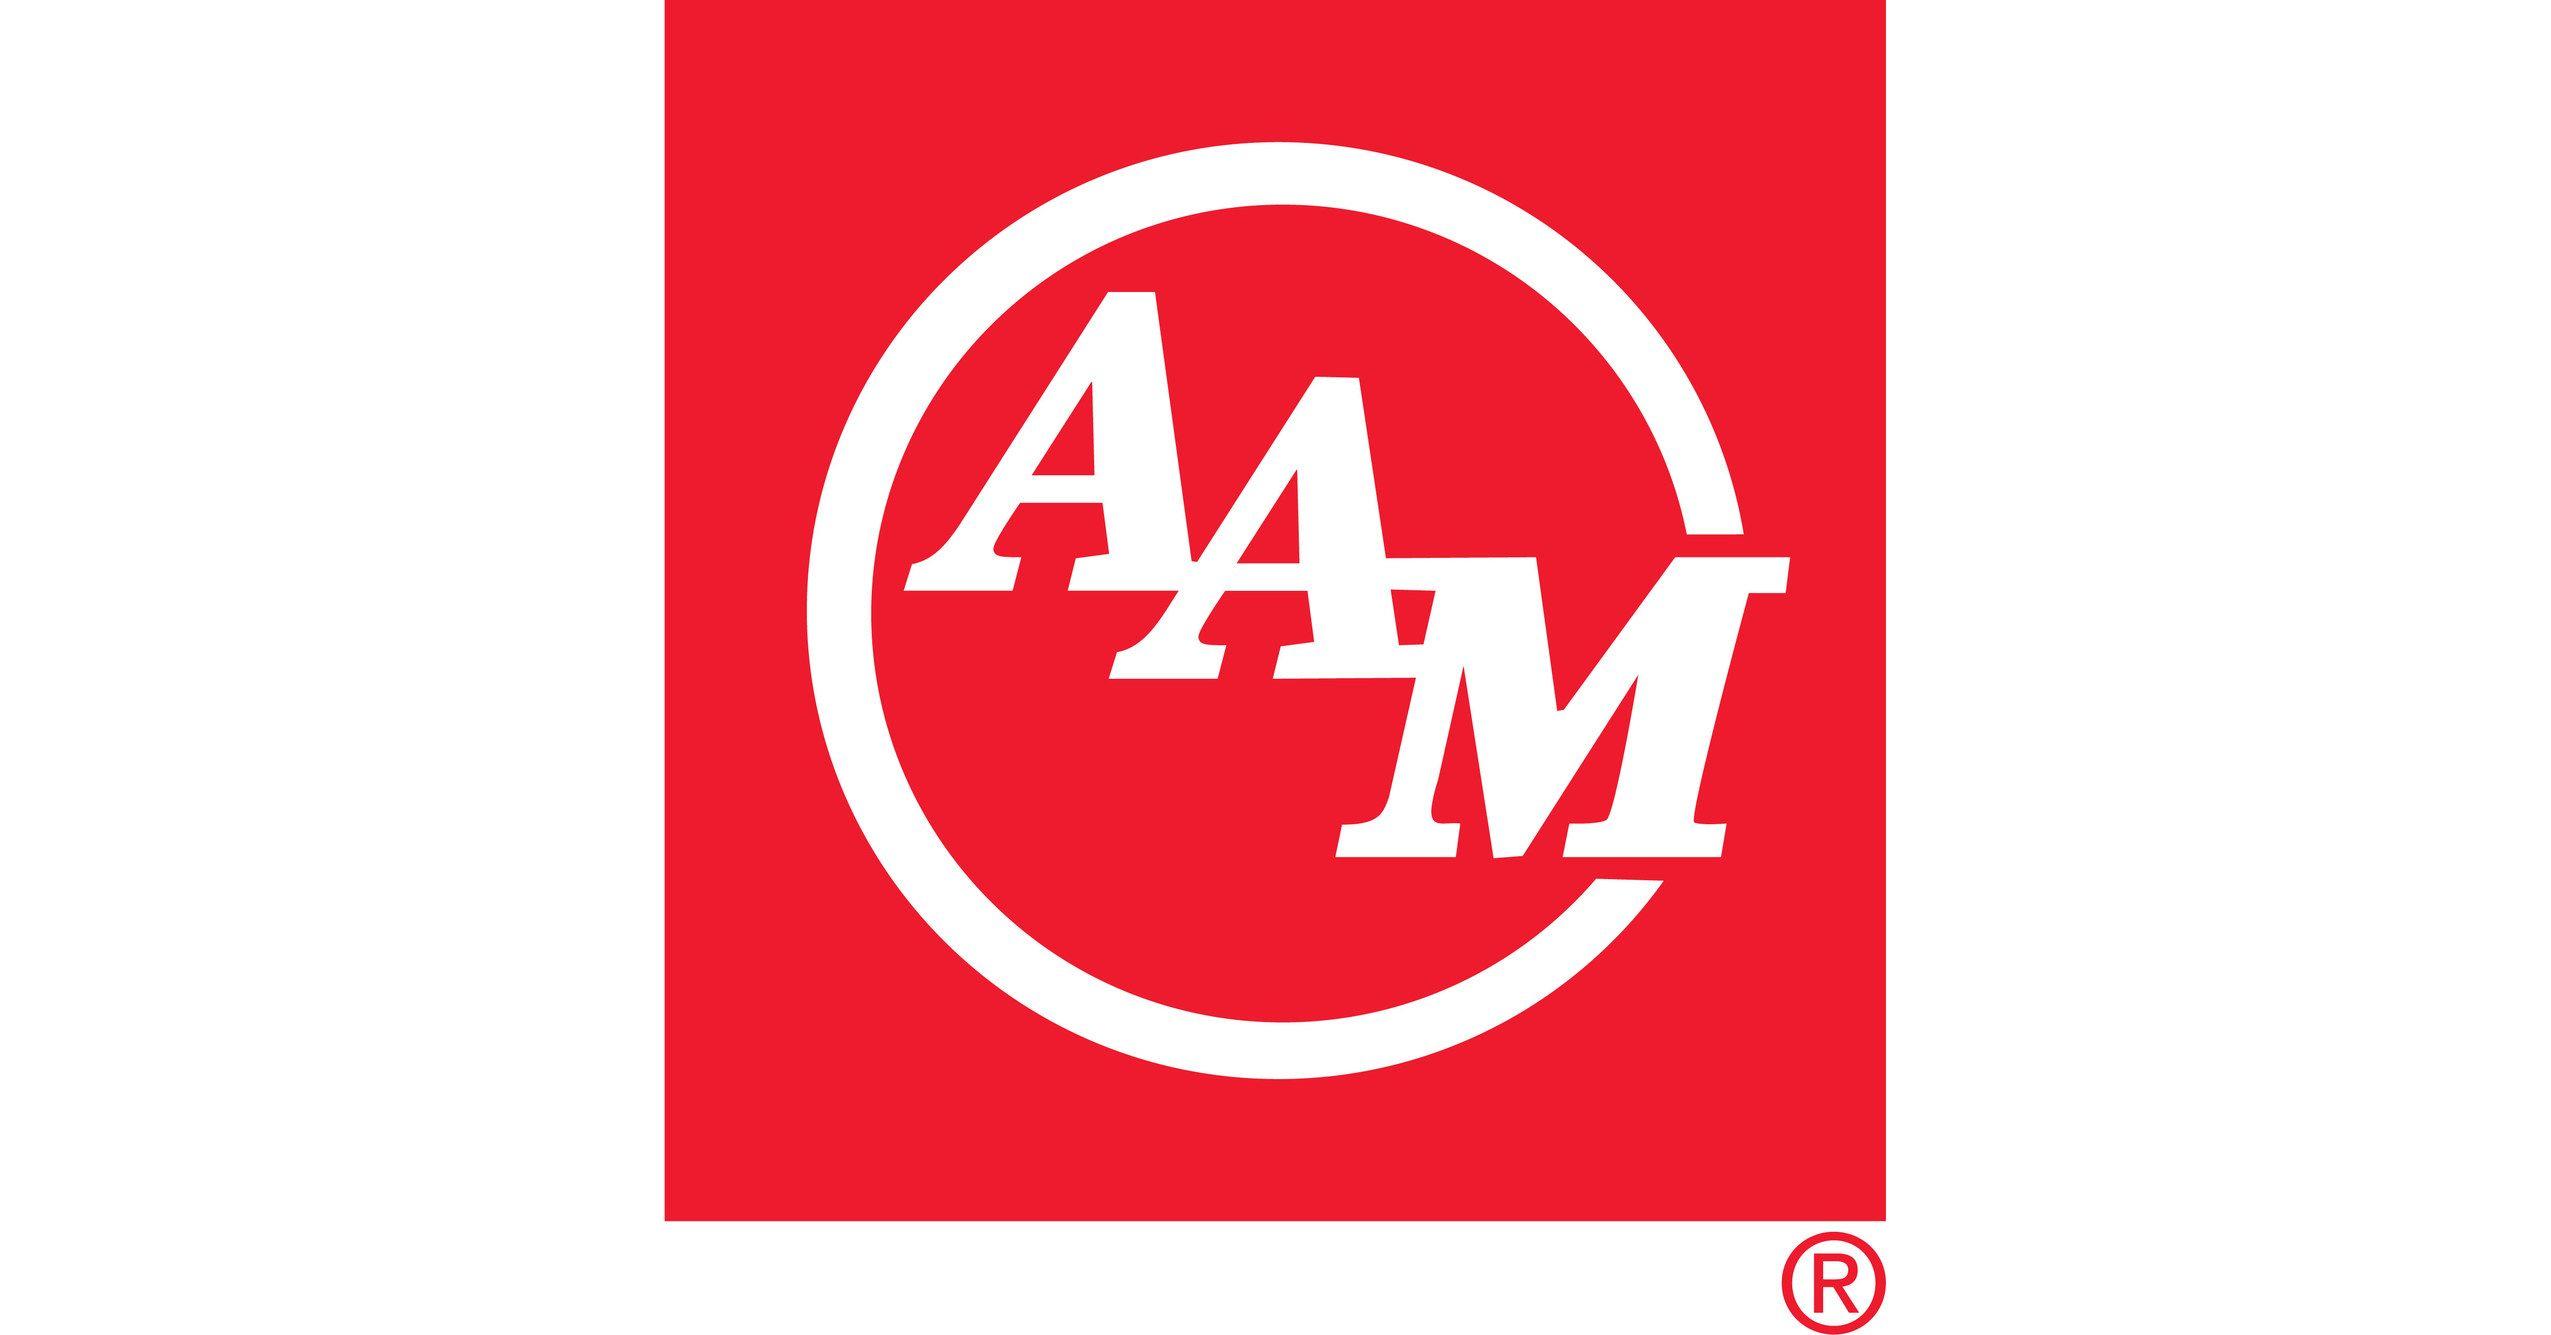 Aam Logo - Trusted Insight. Aam Reports First Quarter 2019 Financial Results